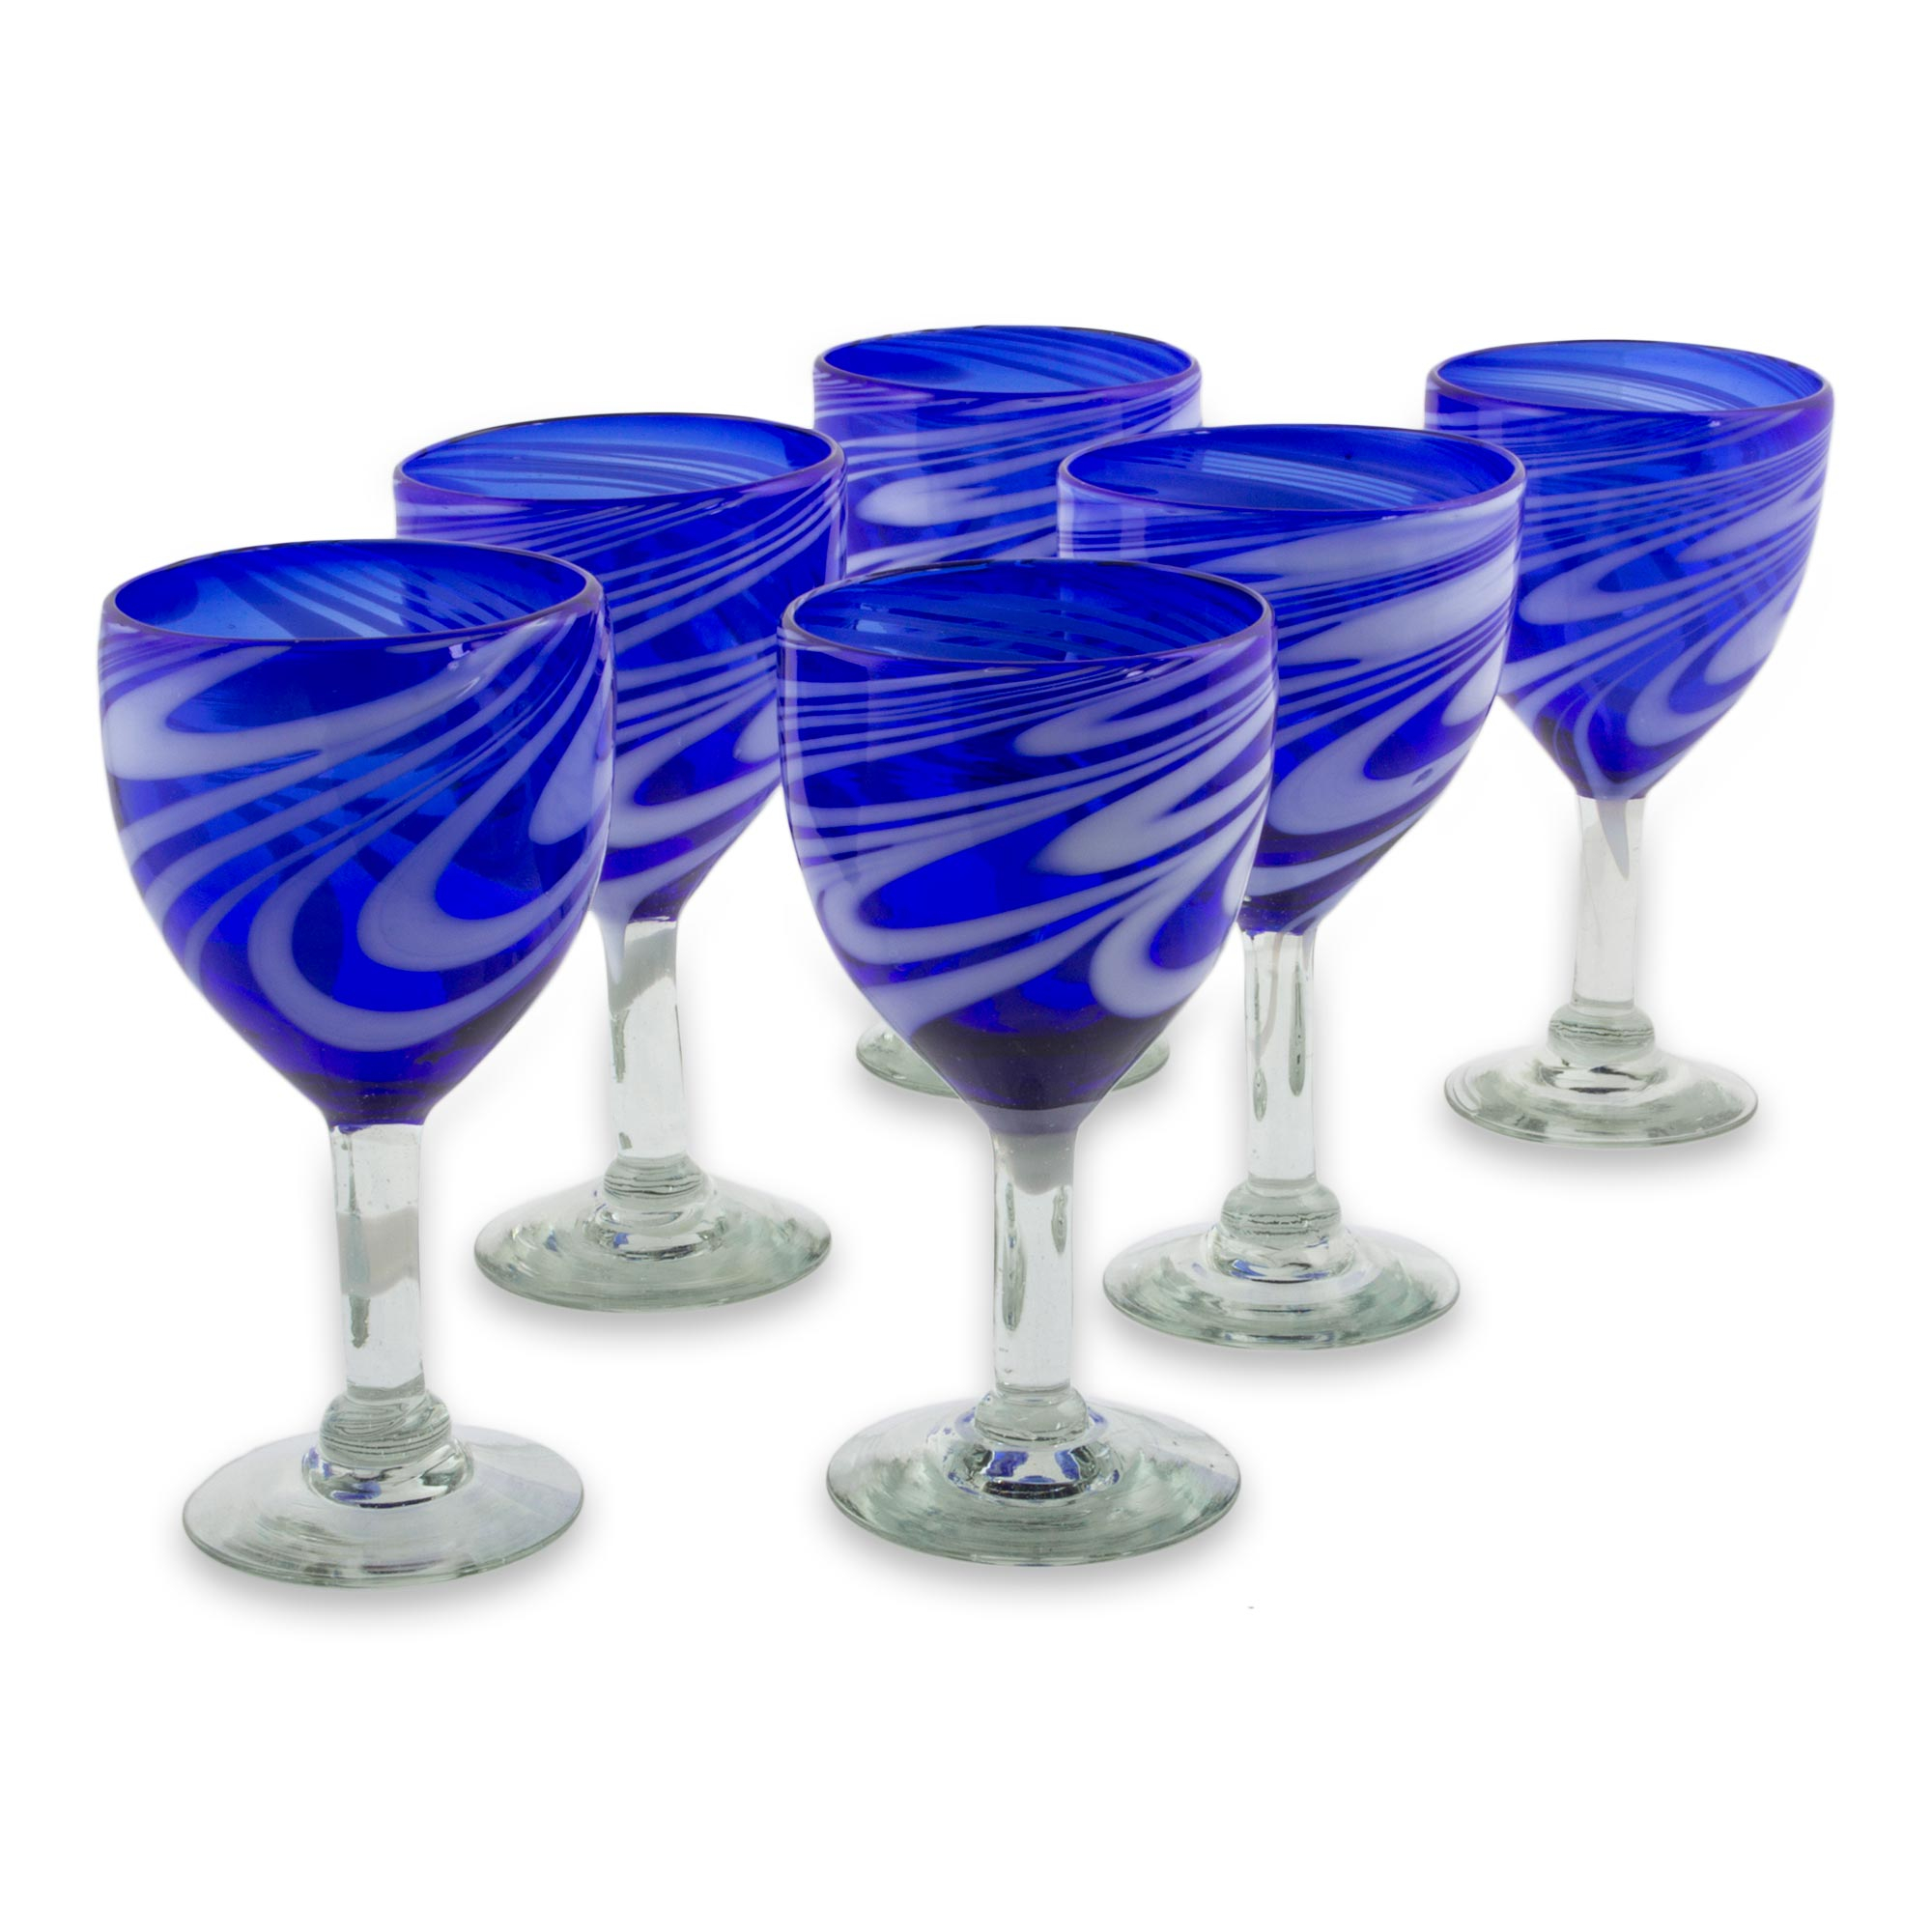 6 Hand Blown 10 oz Blue-White Wine Glasses from Mexico - Whirling ...